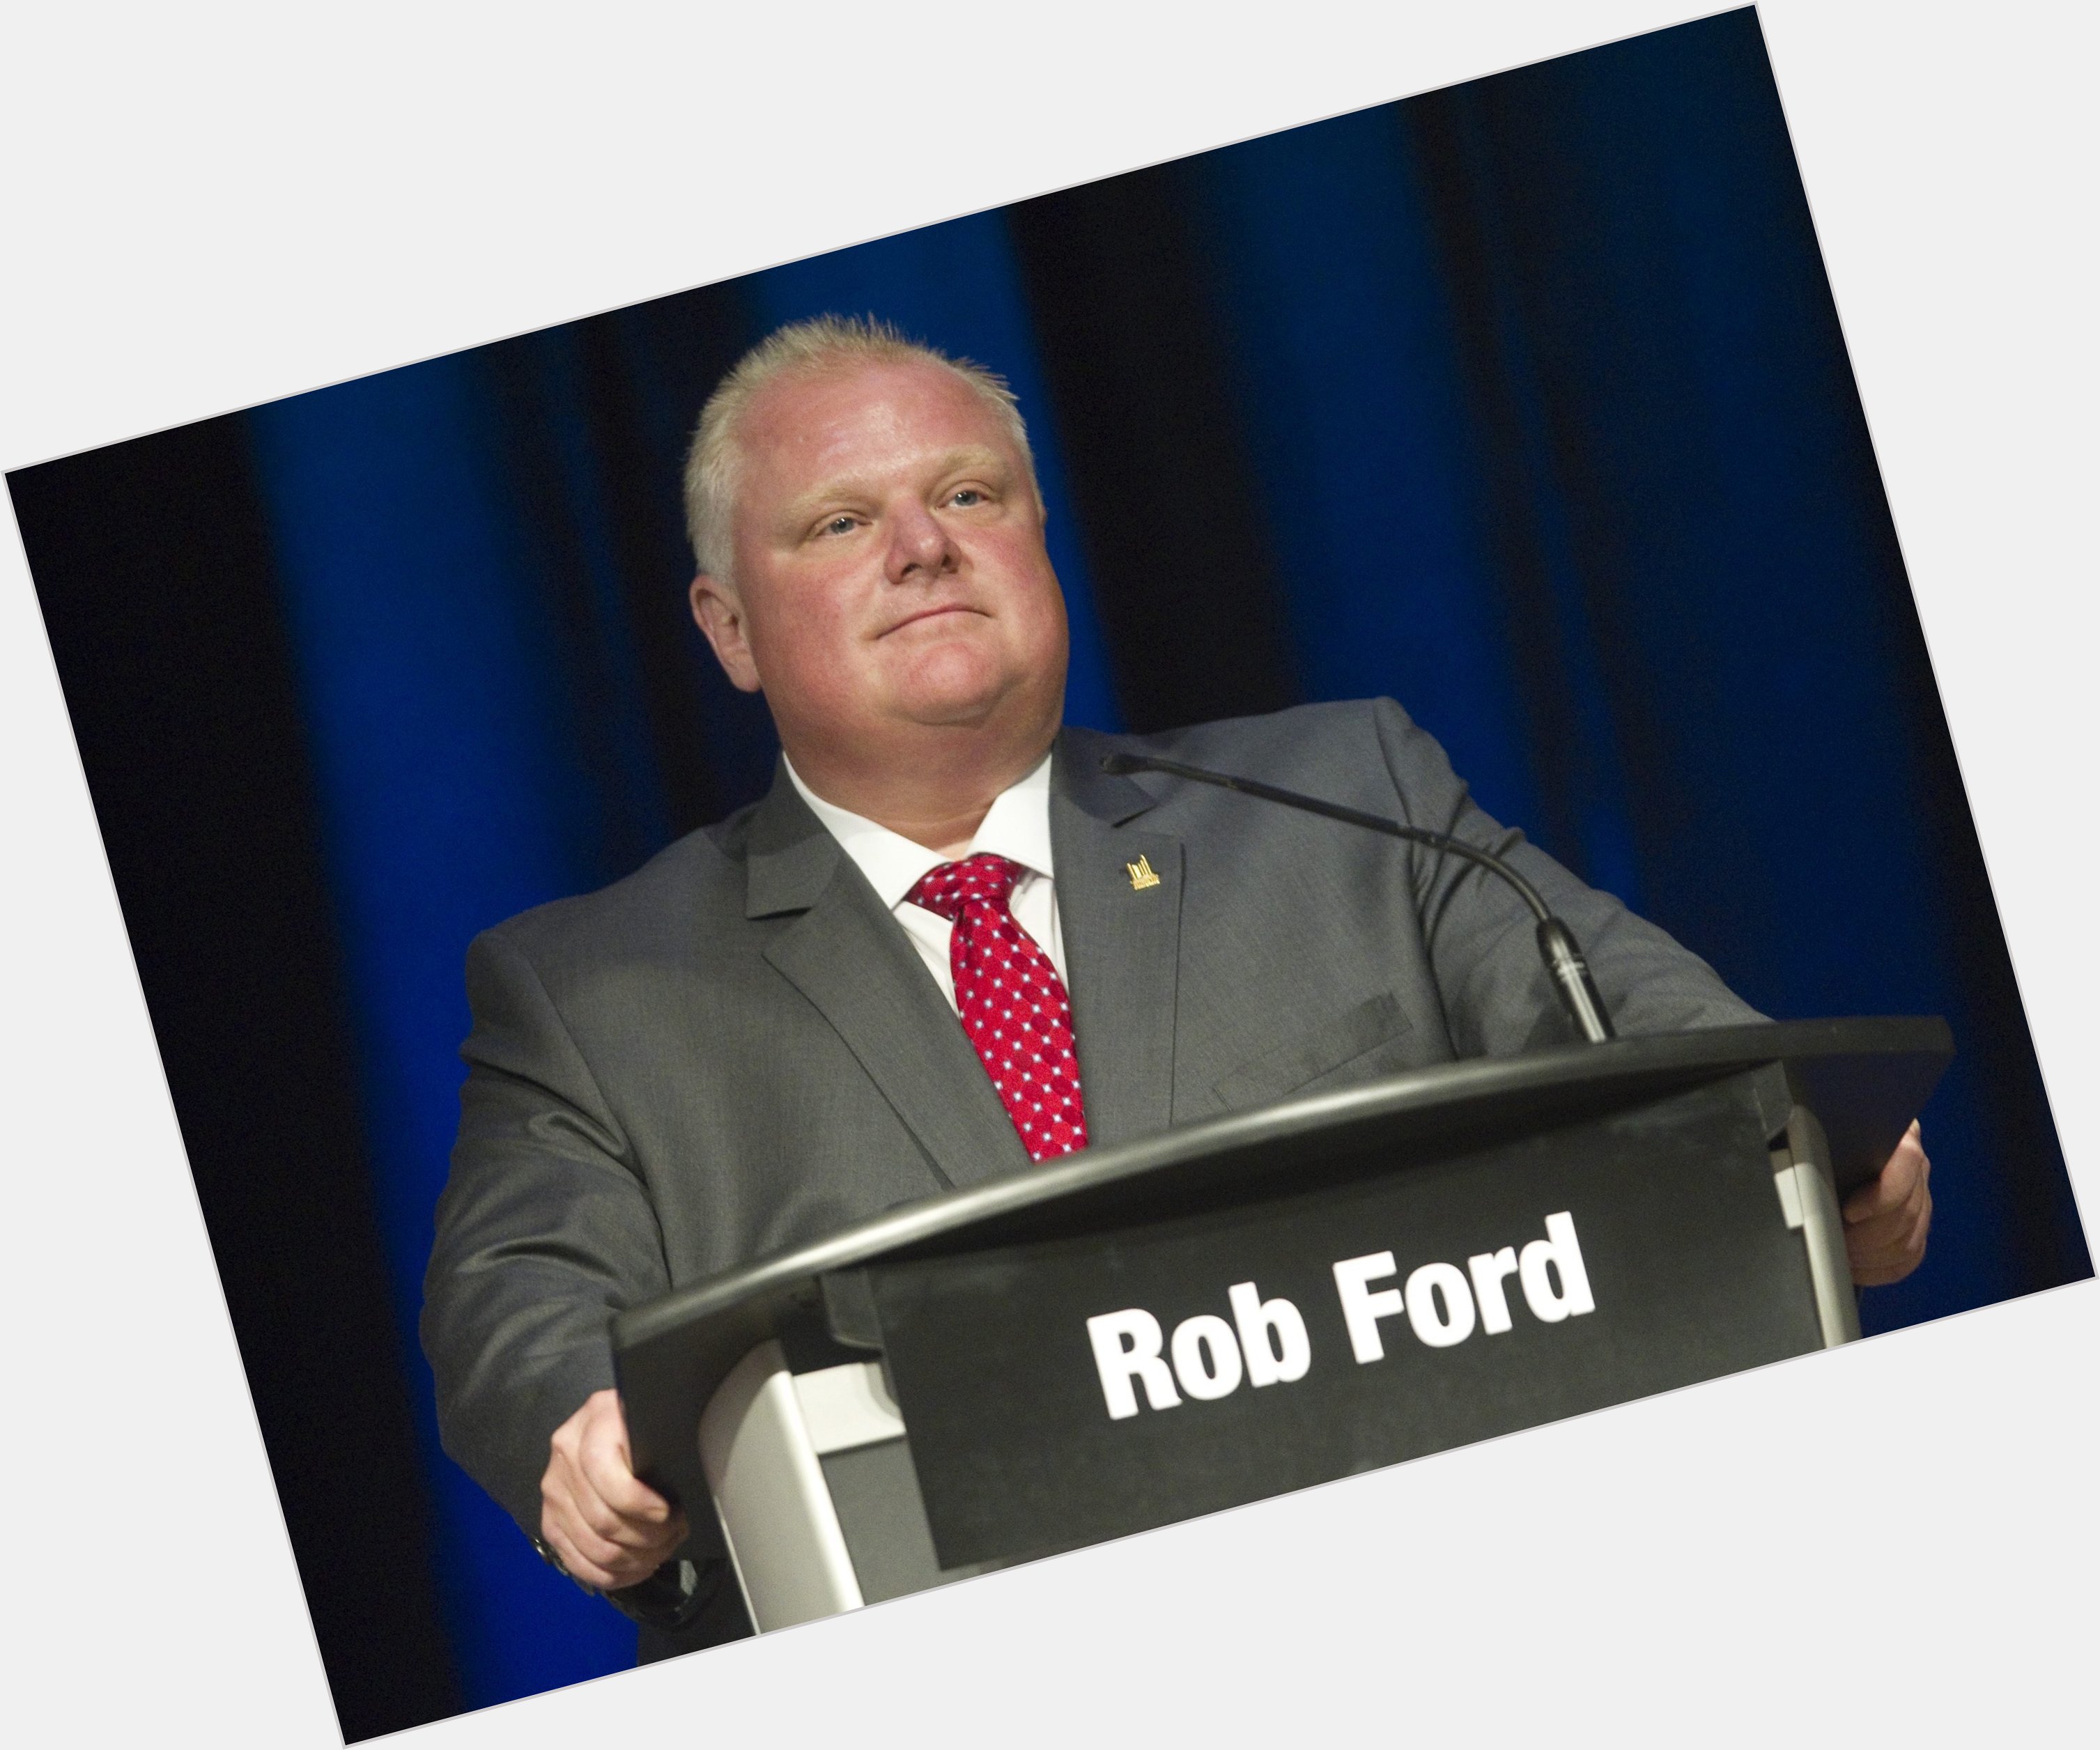  22rob ford 22 wife 1